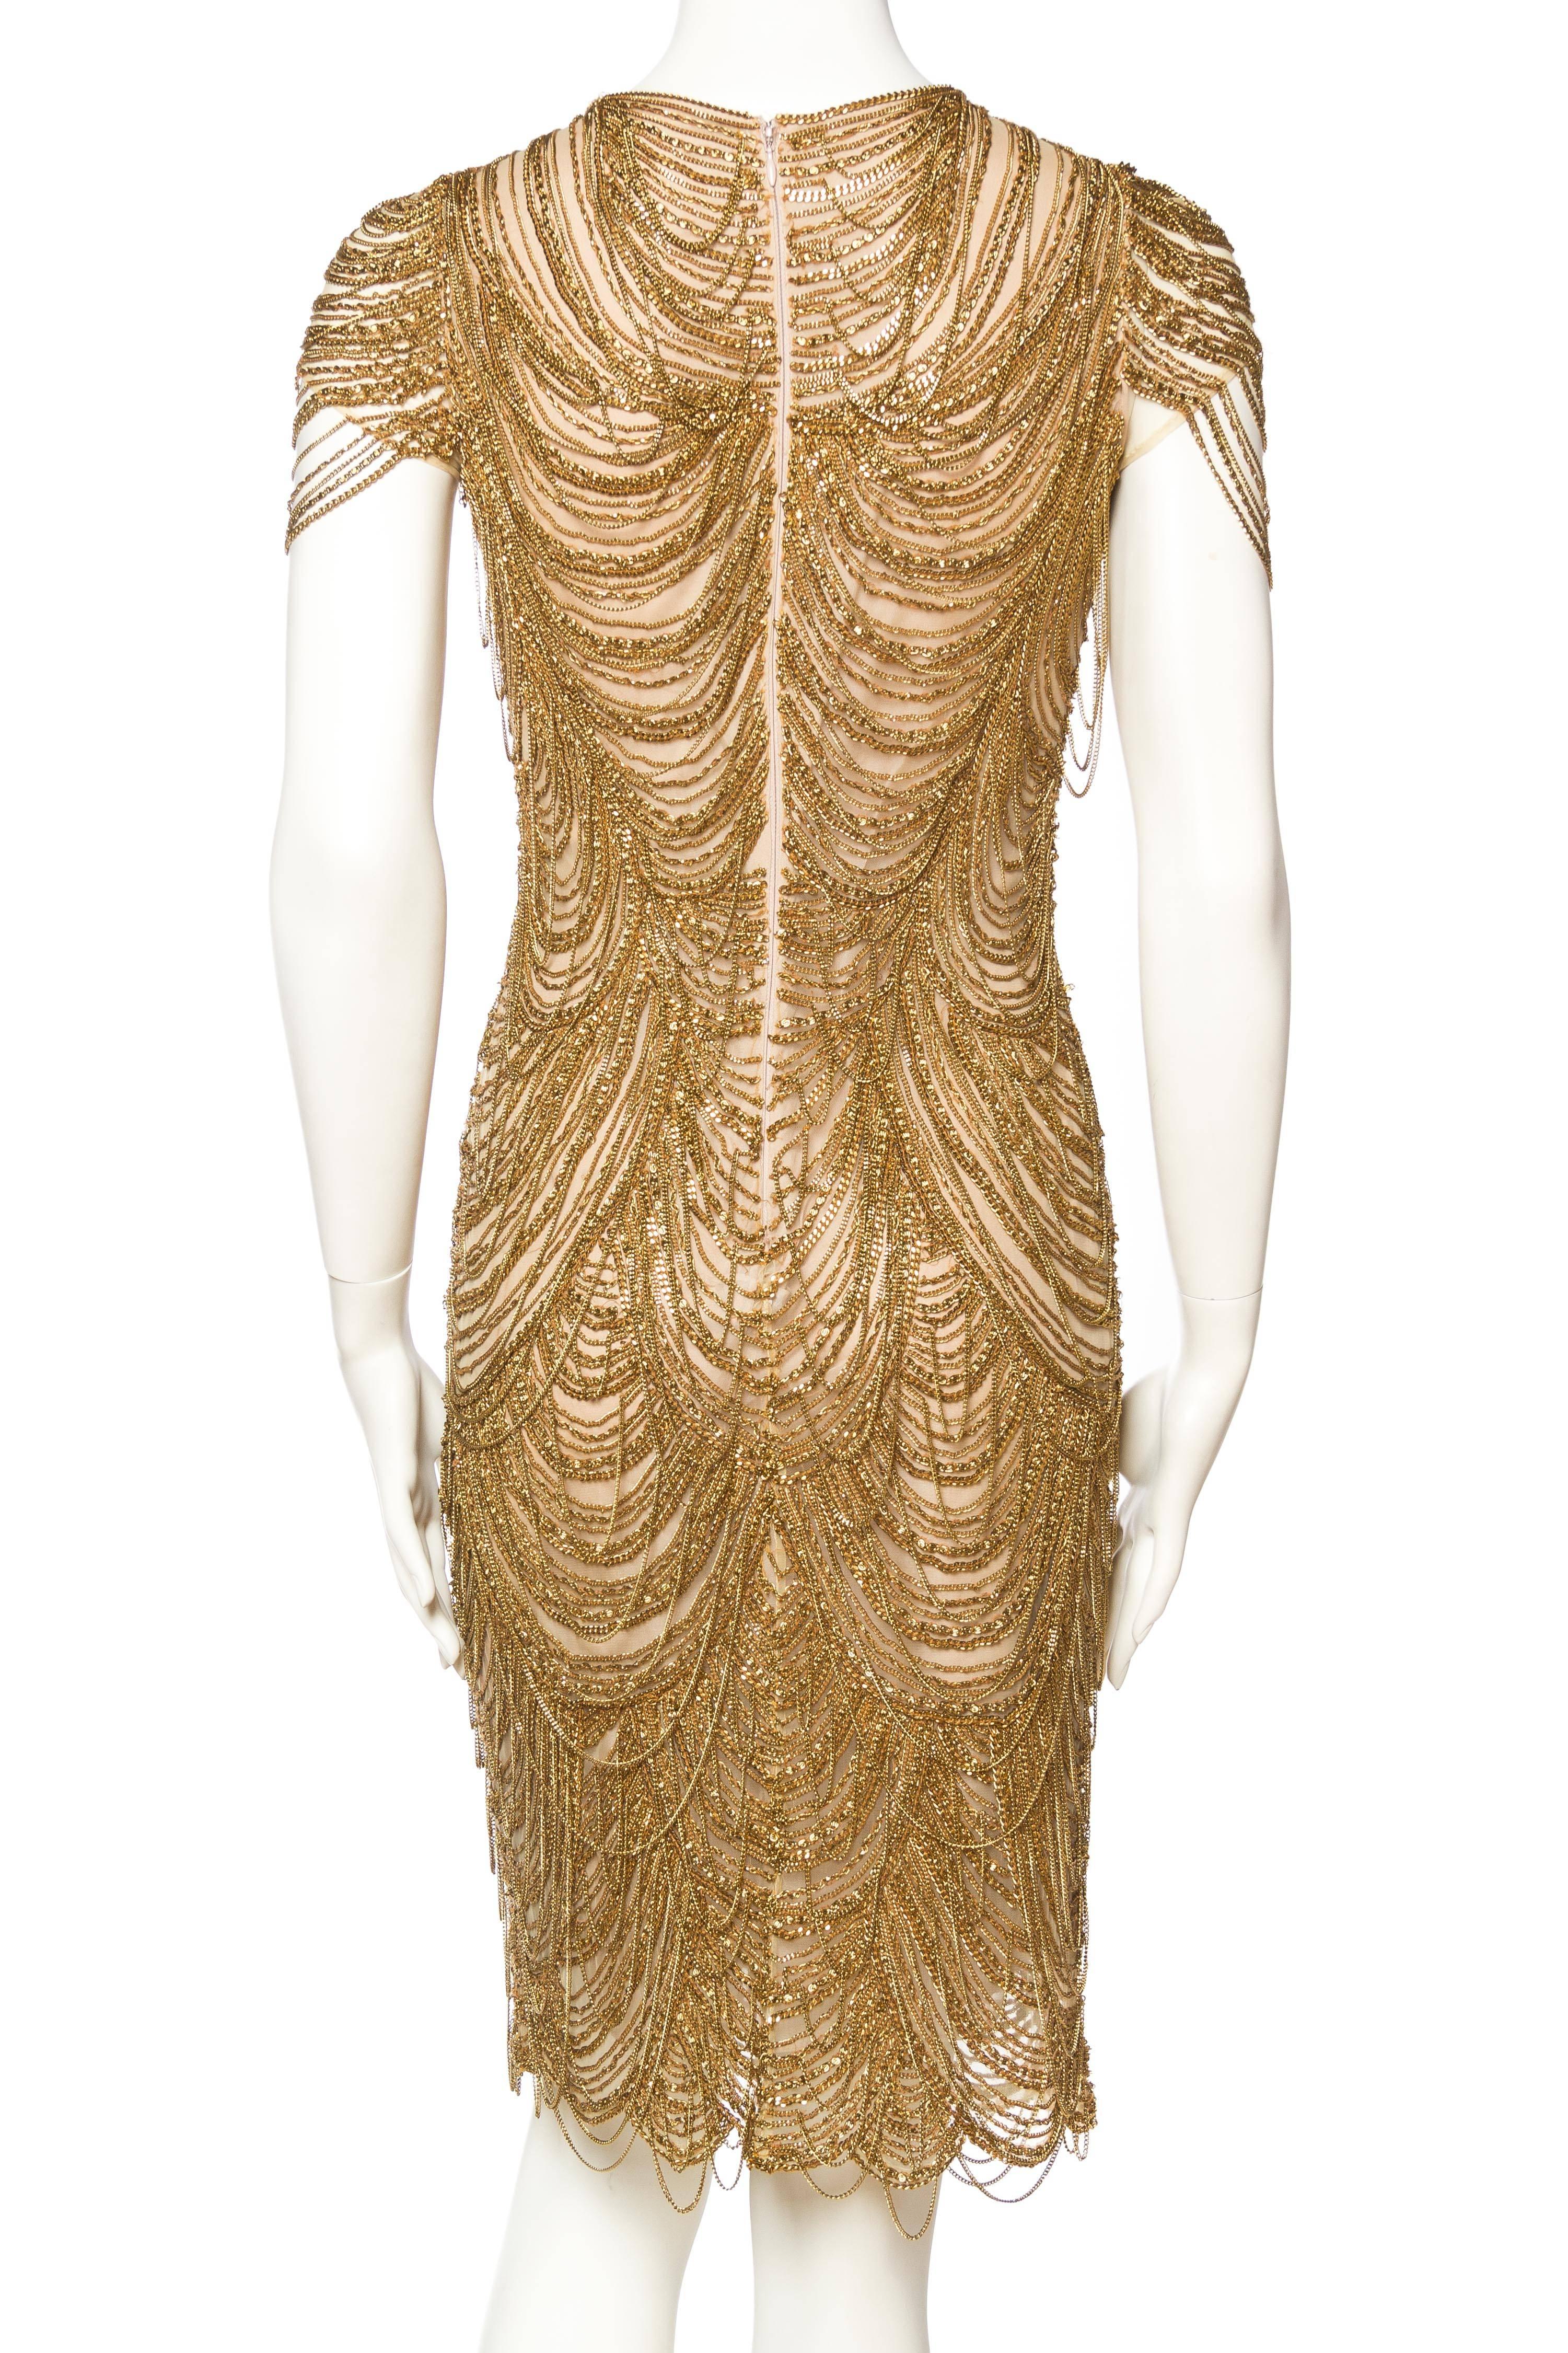 Brown Naeem Khan Nude Dress Dripping in Gold Chains For Sale